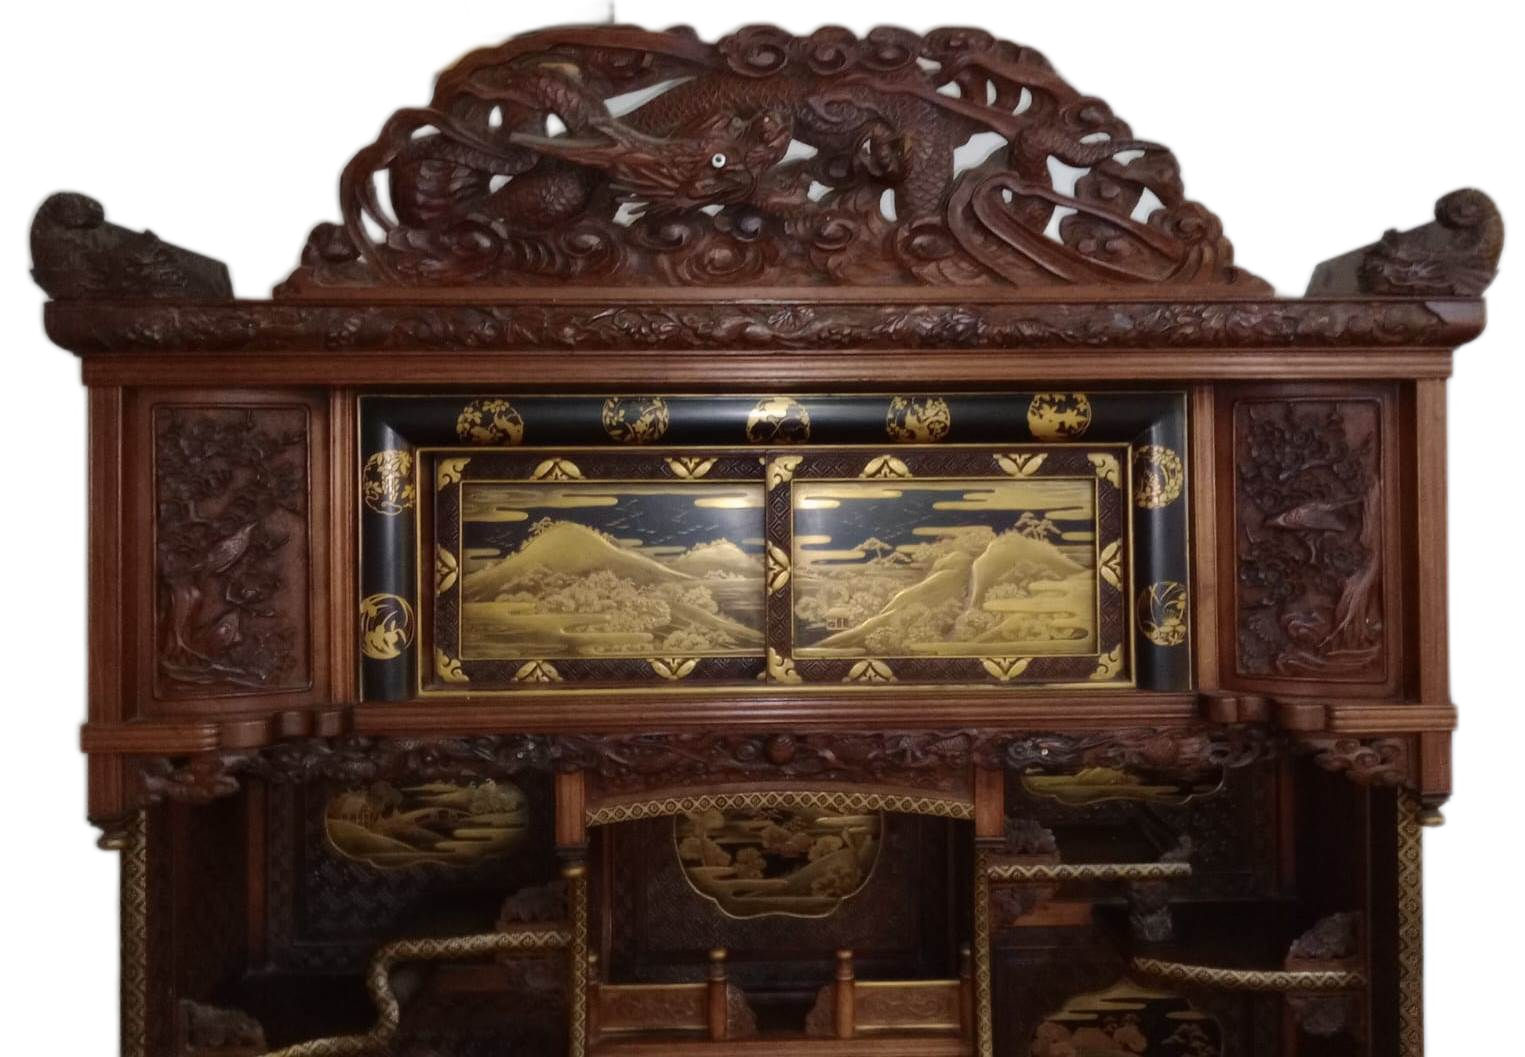 LATE 19TH CENTURY JAPANESE MEIJI LACQUER BOOKCASE CABINET - Image 2 of 10